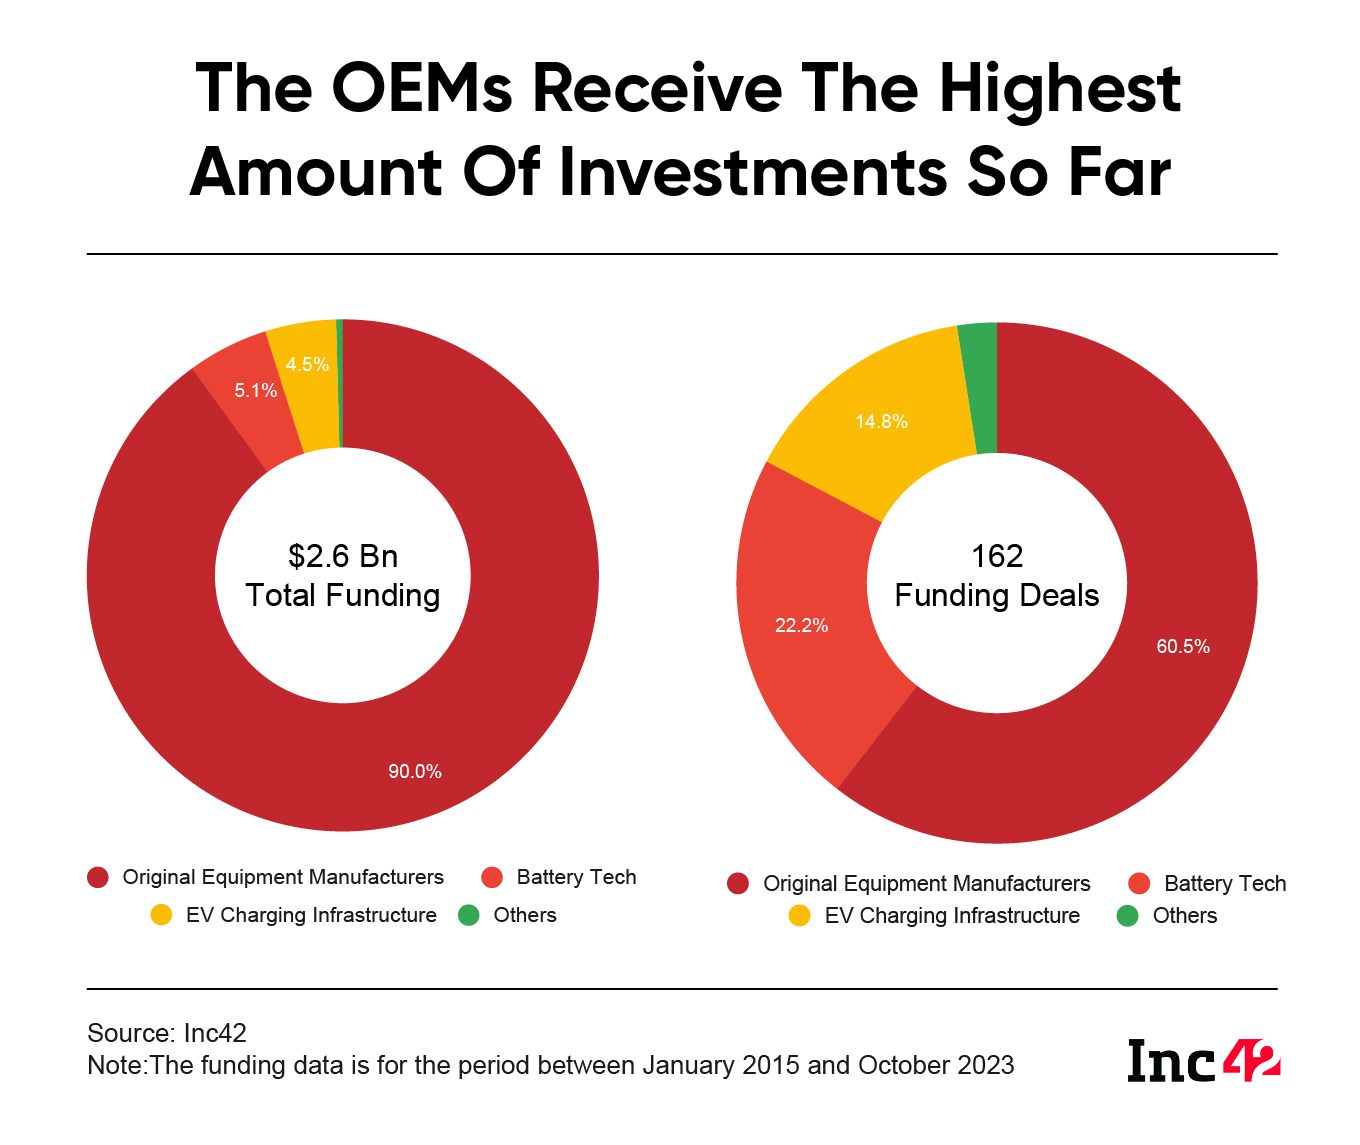 OEMs receive more funding so far